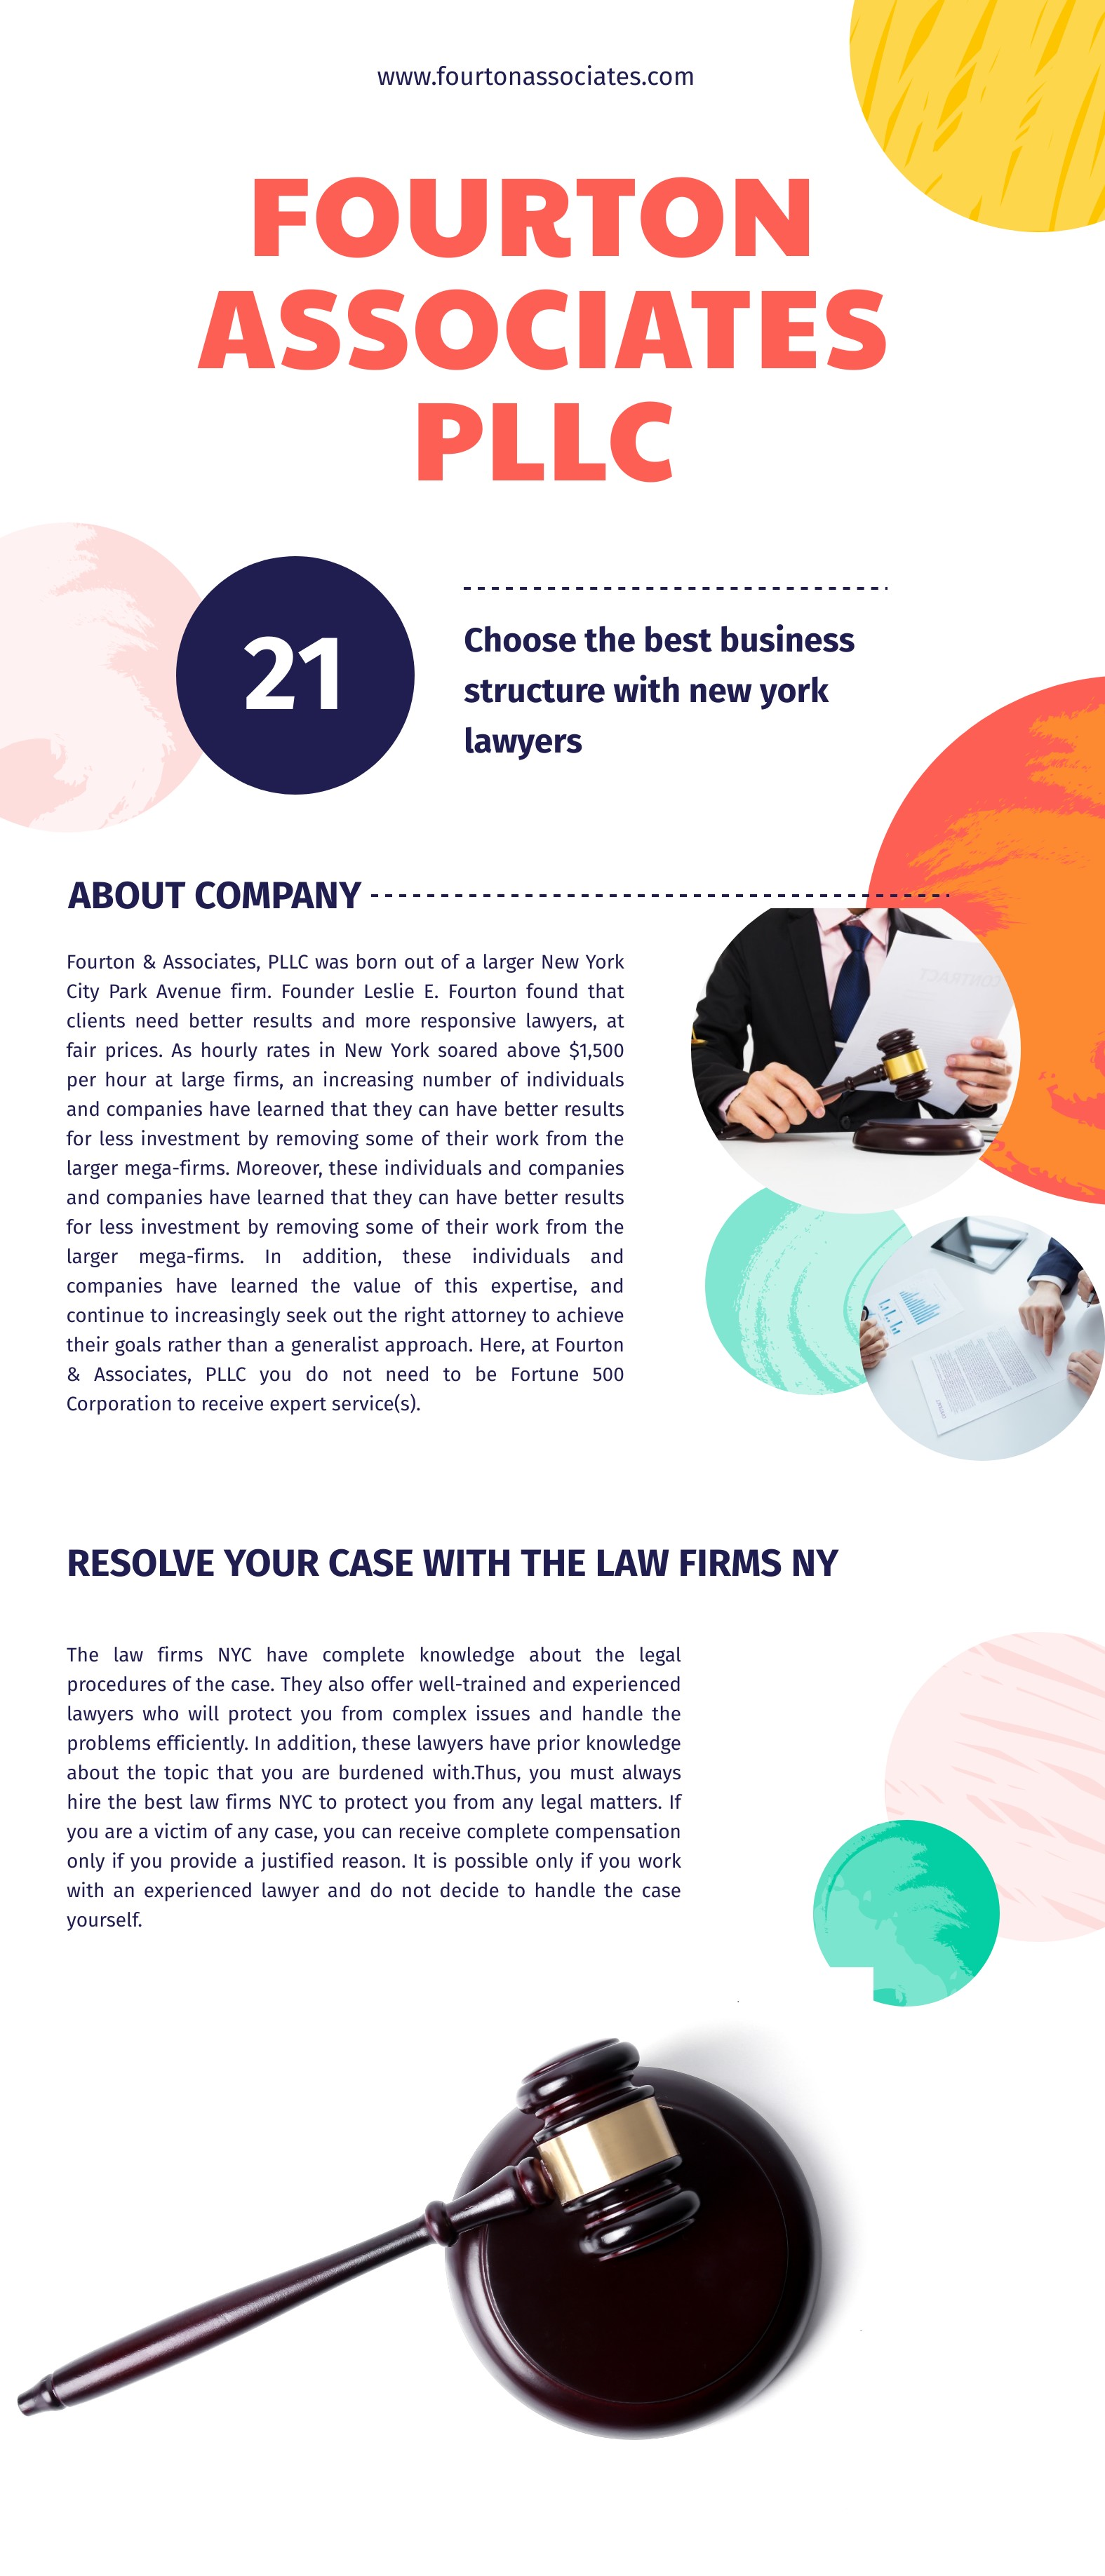 The best law firms in NYC have a quality reputation 